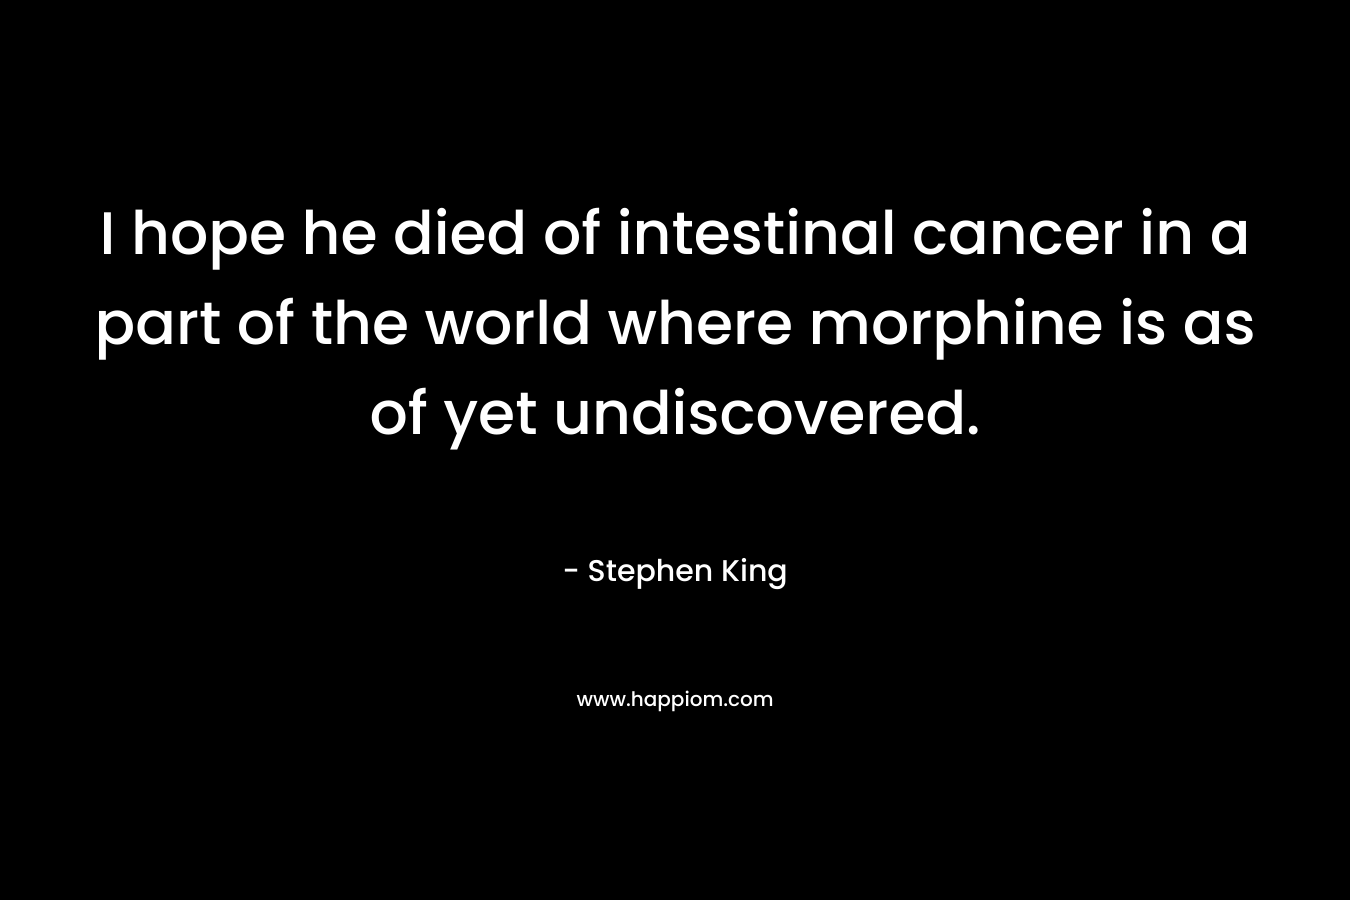 I hope he died of intestinal cancer in a part of the world where morphine is as of yet undiscovered. – Stephen King